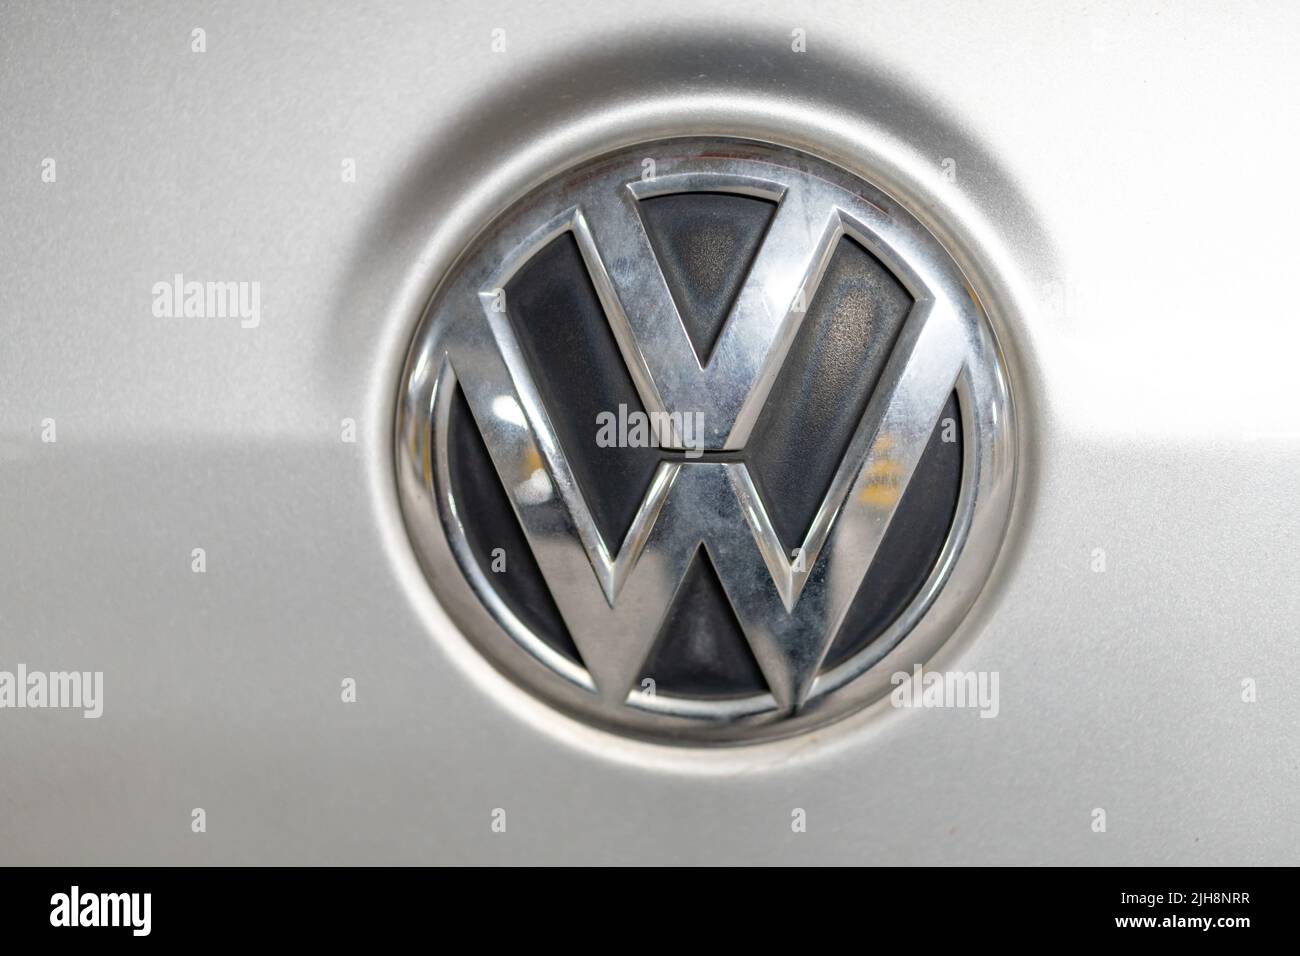 The Volkswagen logo on a silver-colored car in Poznan, Poland Stock Photo